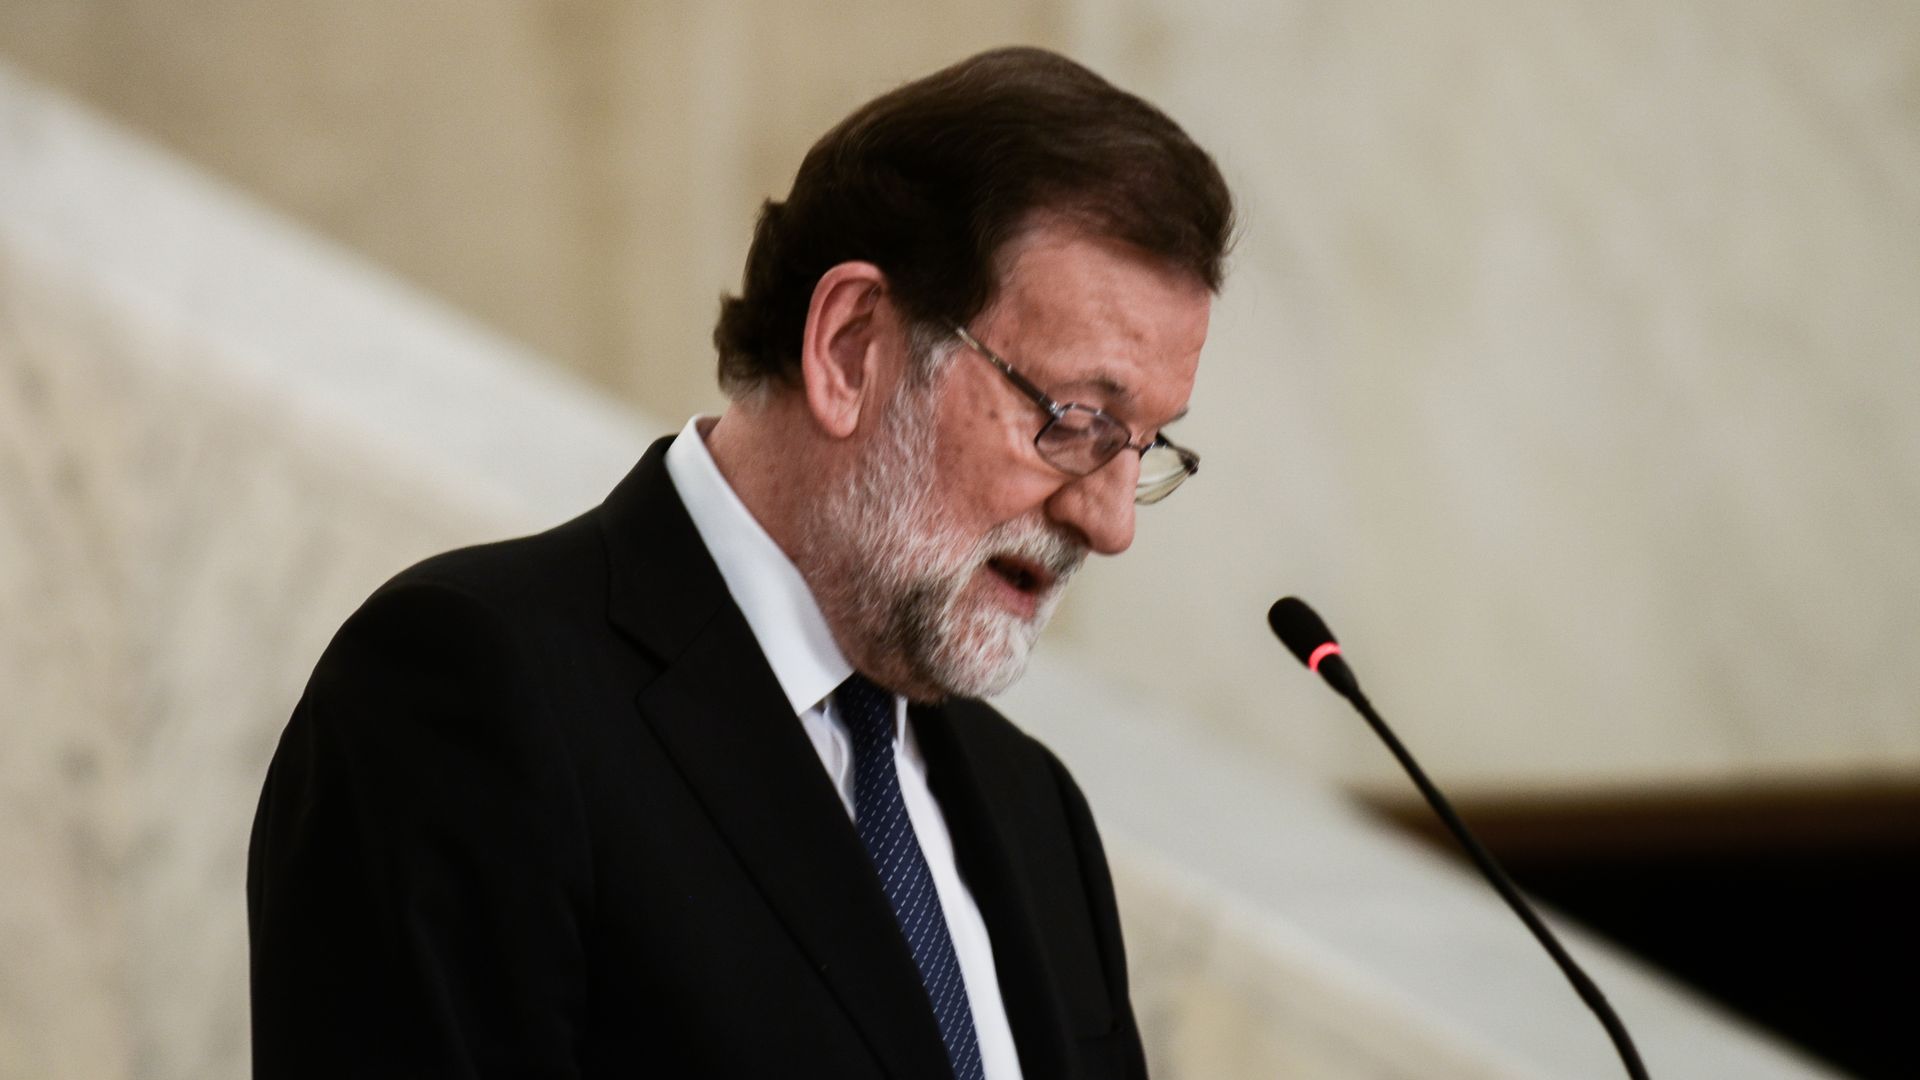 Spanish PM Mariano Rajoy looks down while speaking at a press conference 